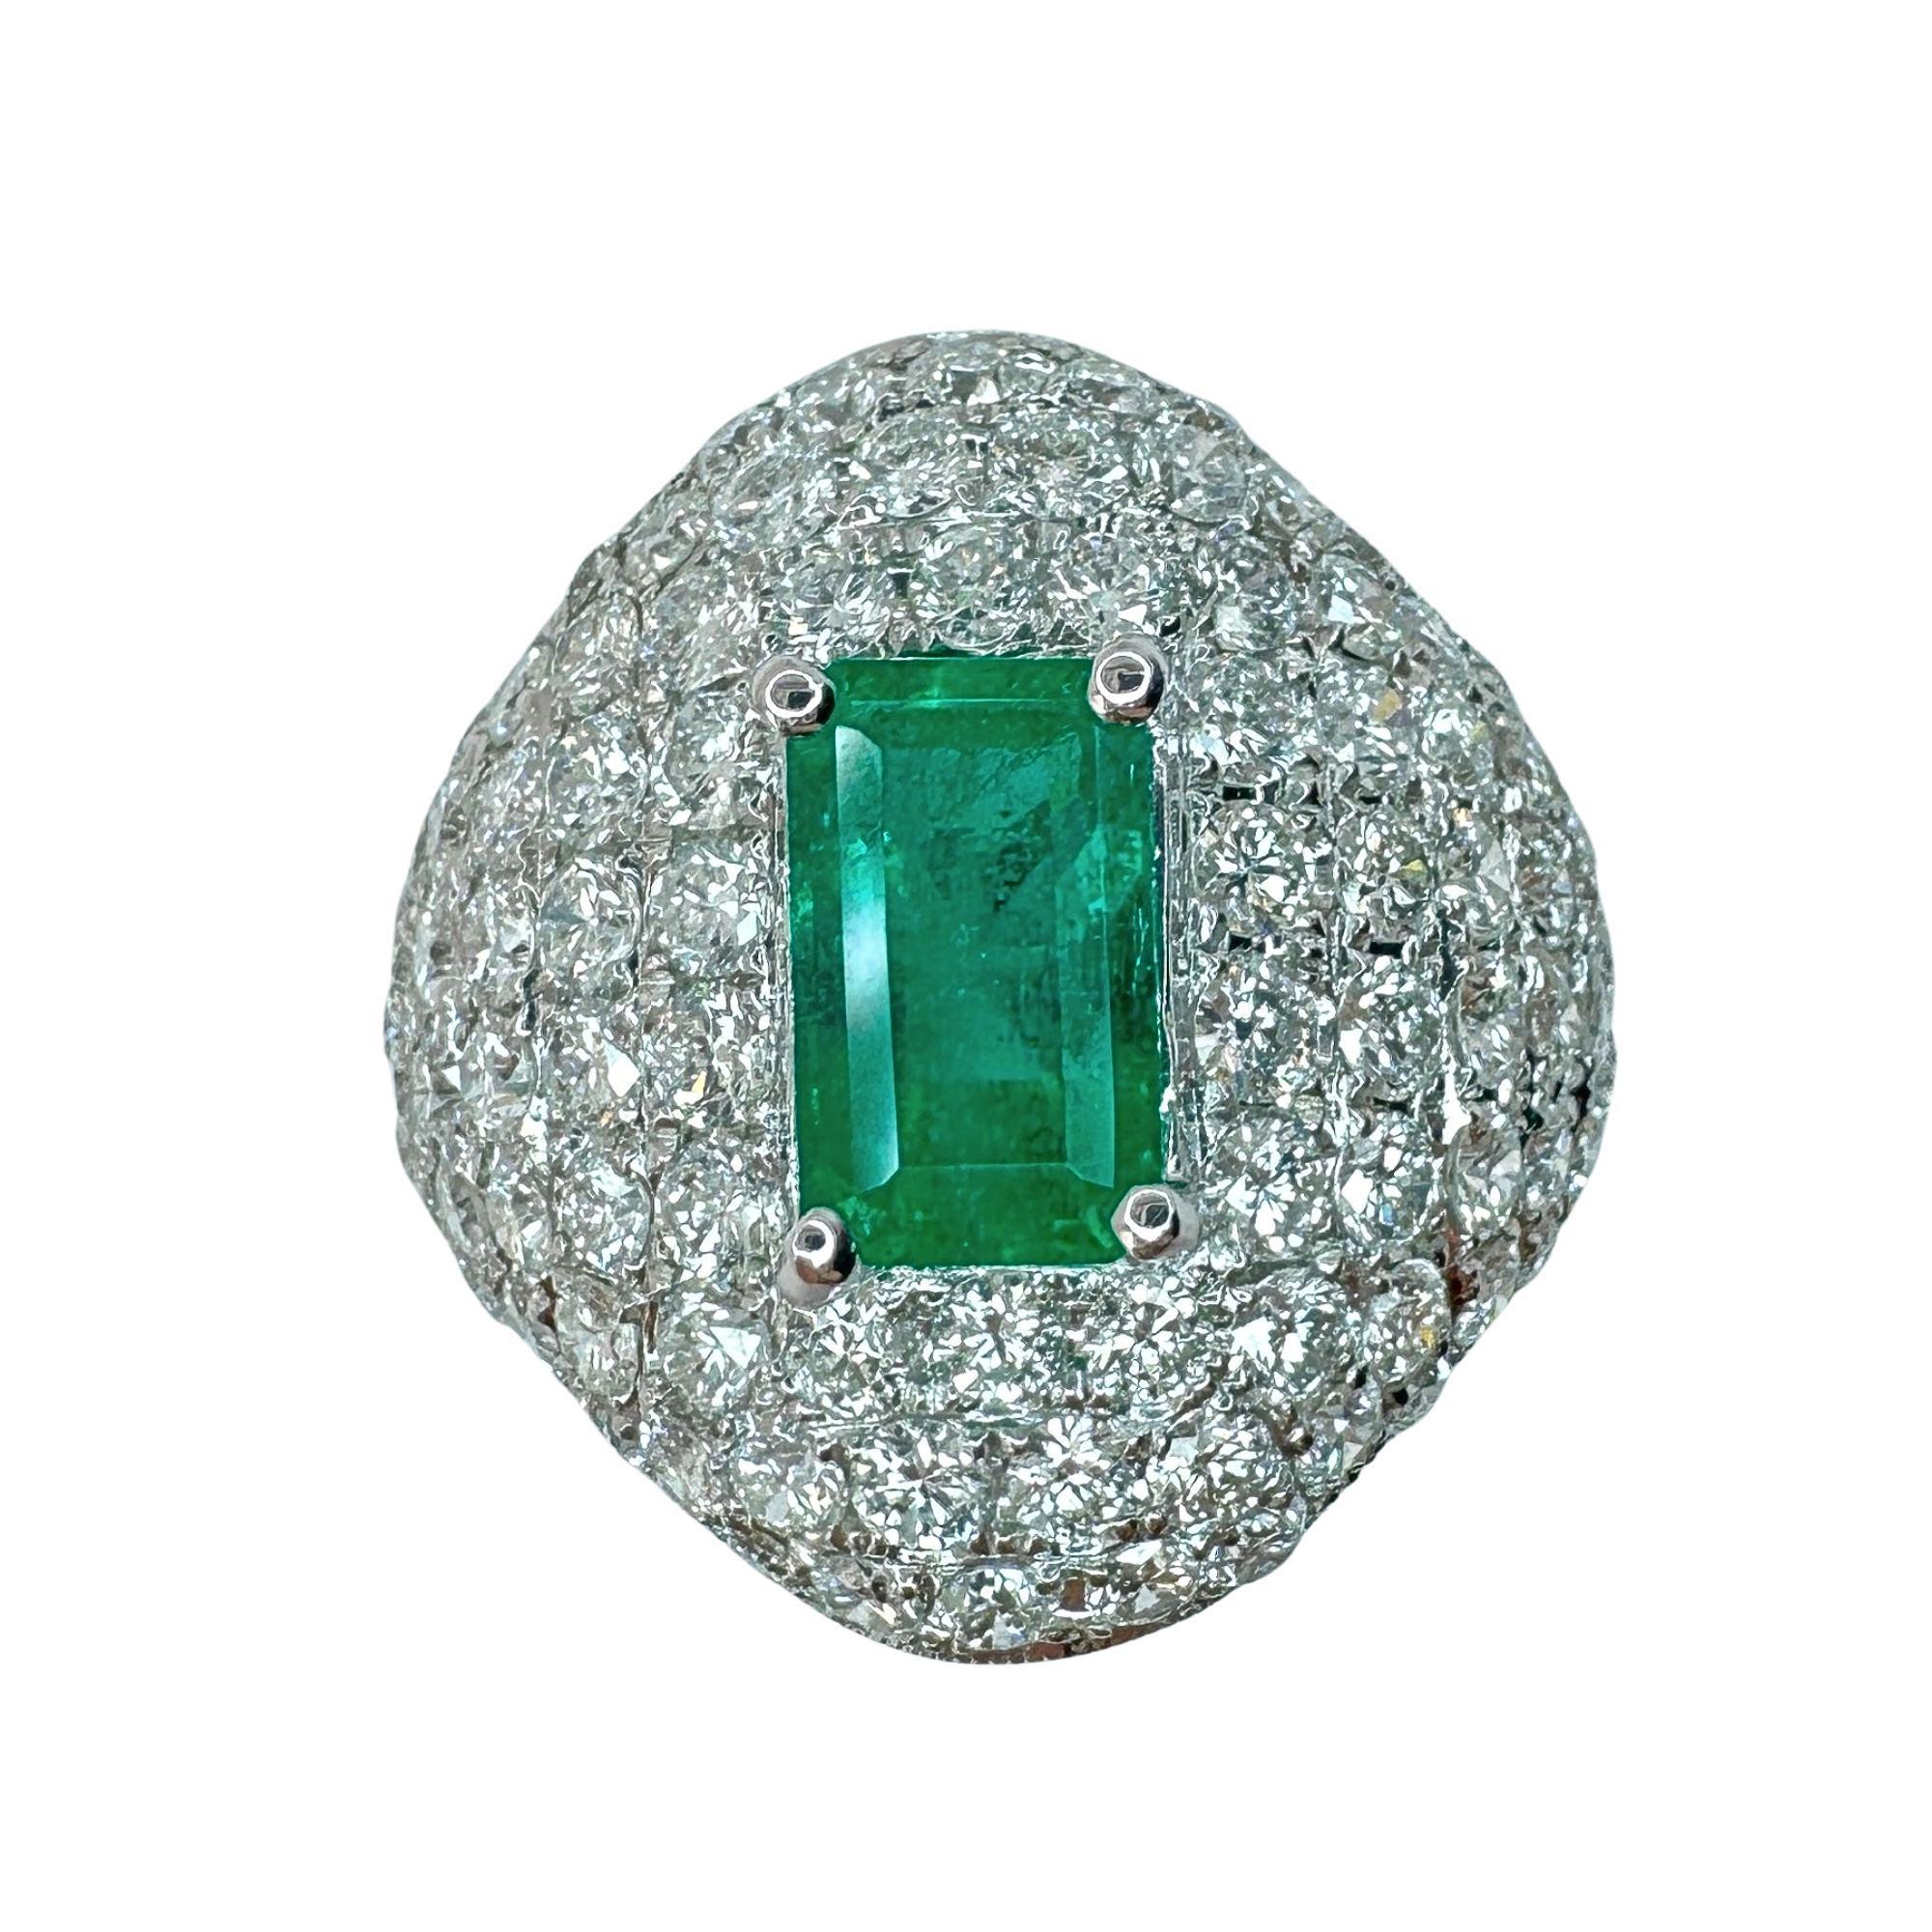 Look at this gem: 18k Diamond and Emerald Ring. Weighing 9.84 grams and sized at 6.25, this ring features a gorgeous 1.46 carat emerald in the center and 2.58 carats of sparkling diamonds surrounding it. Elevate your style and add a touch of luxury